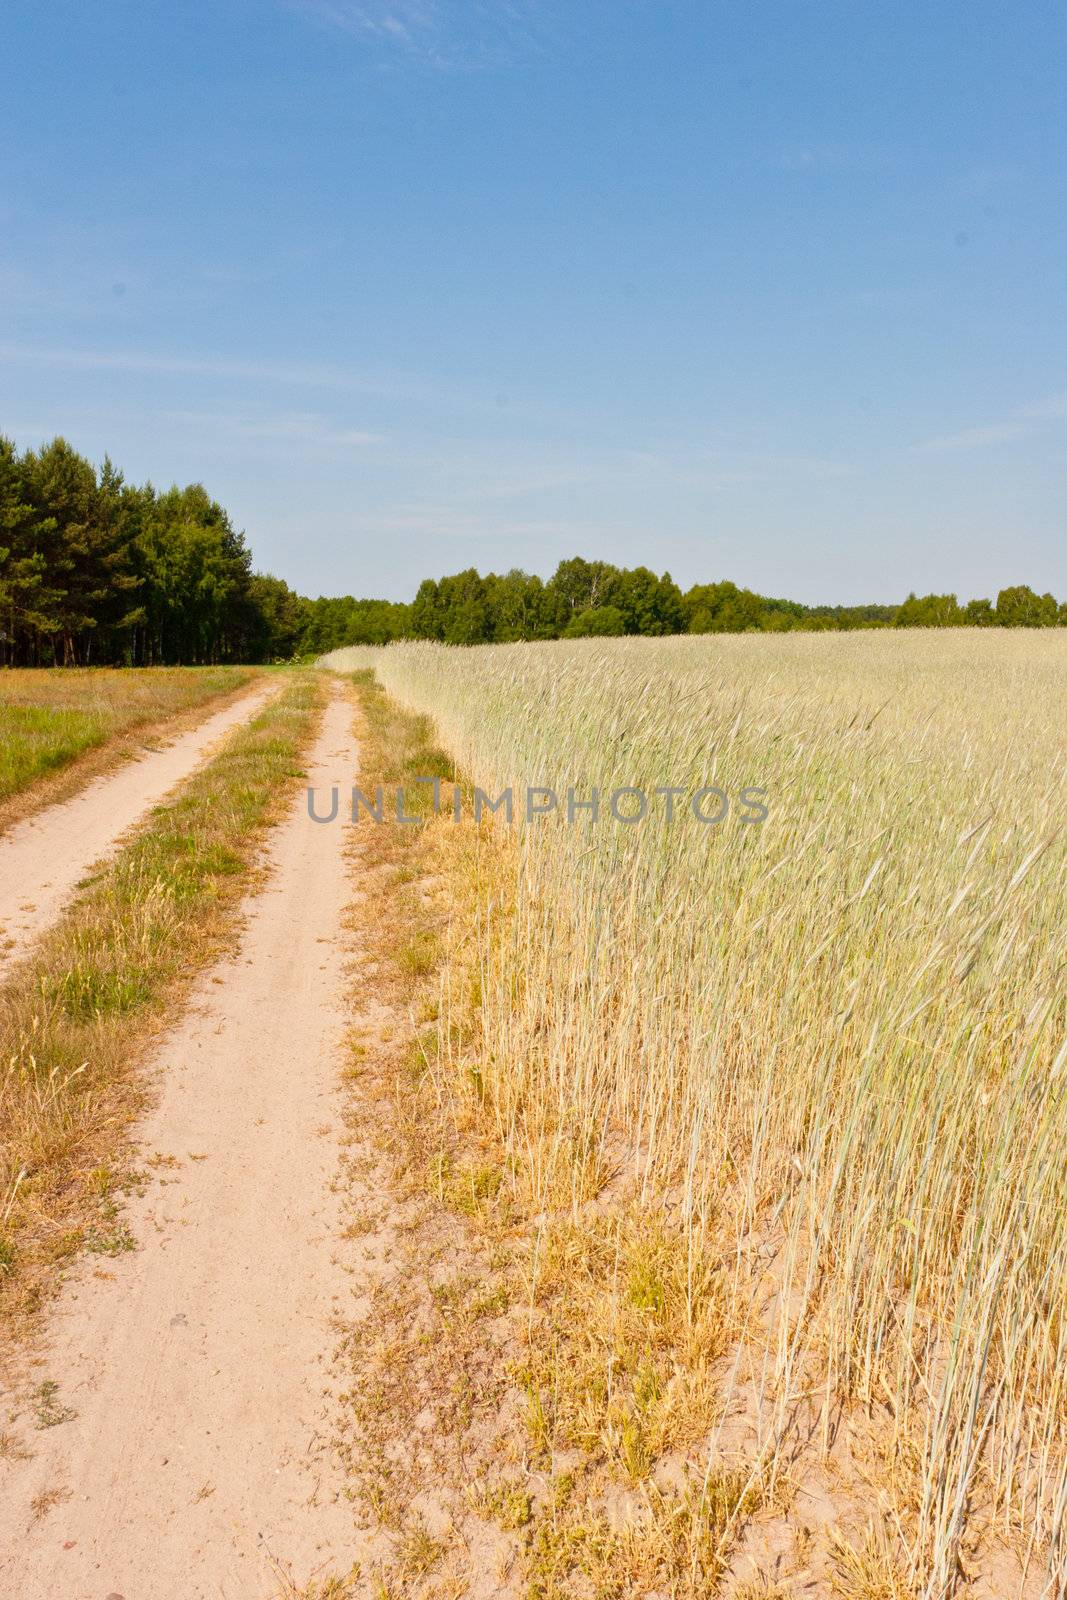 Rye (Secale cereale) is a grass grown extensively as a grain and as a forage crop. It is a member of the wheat tribe (Triticeae) and is closely related to barley and wheat.